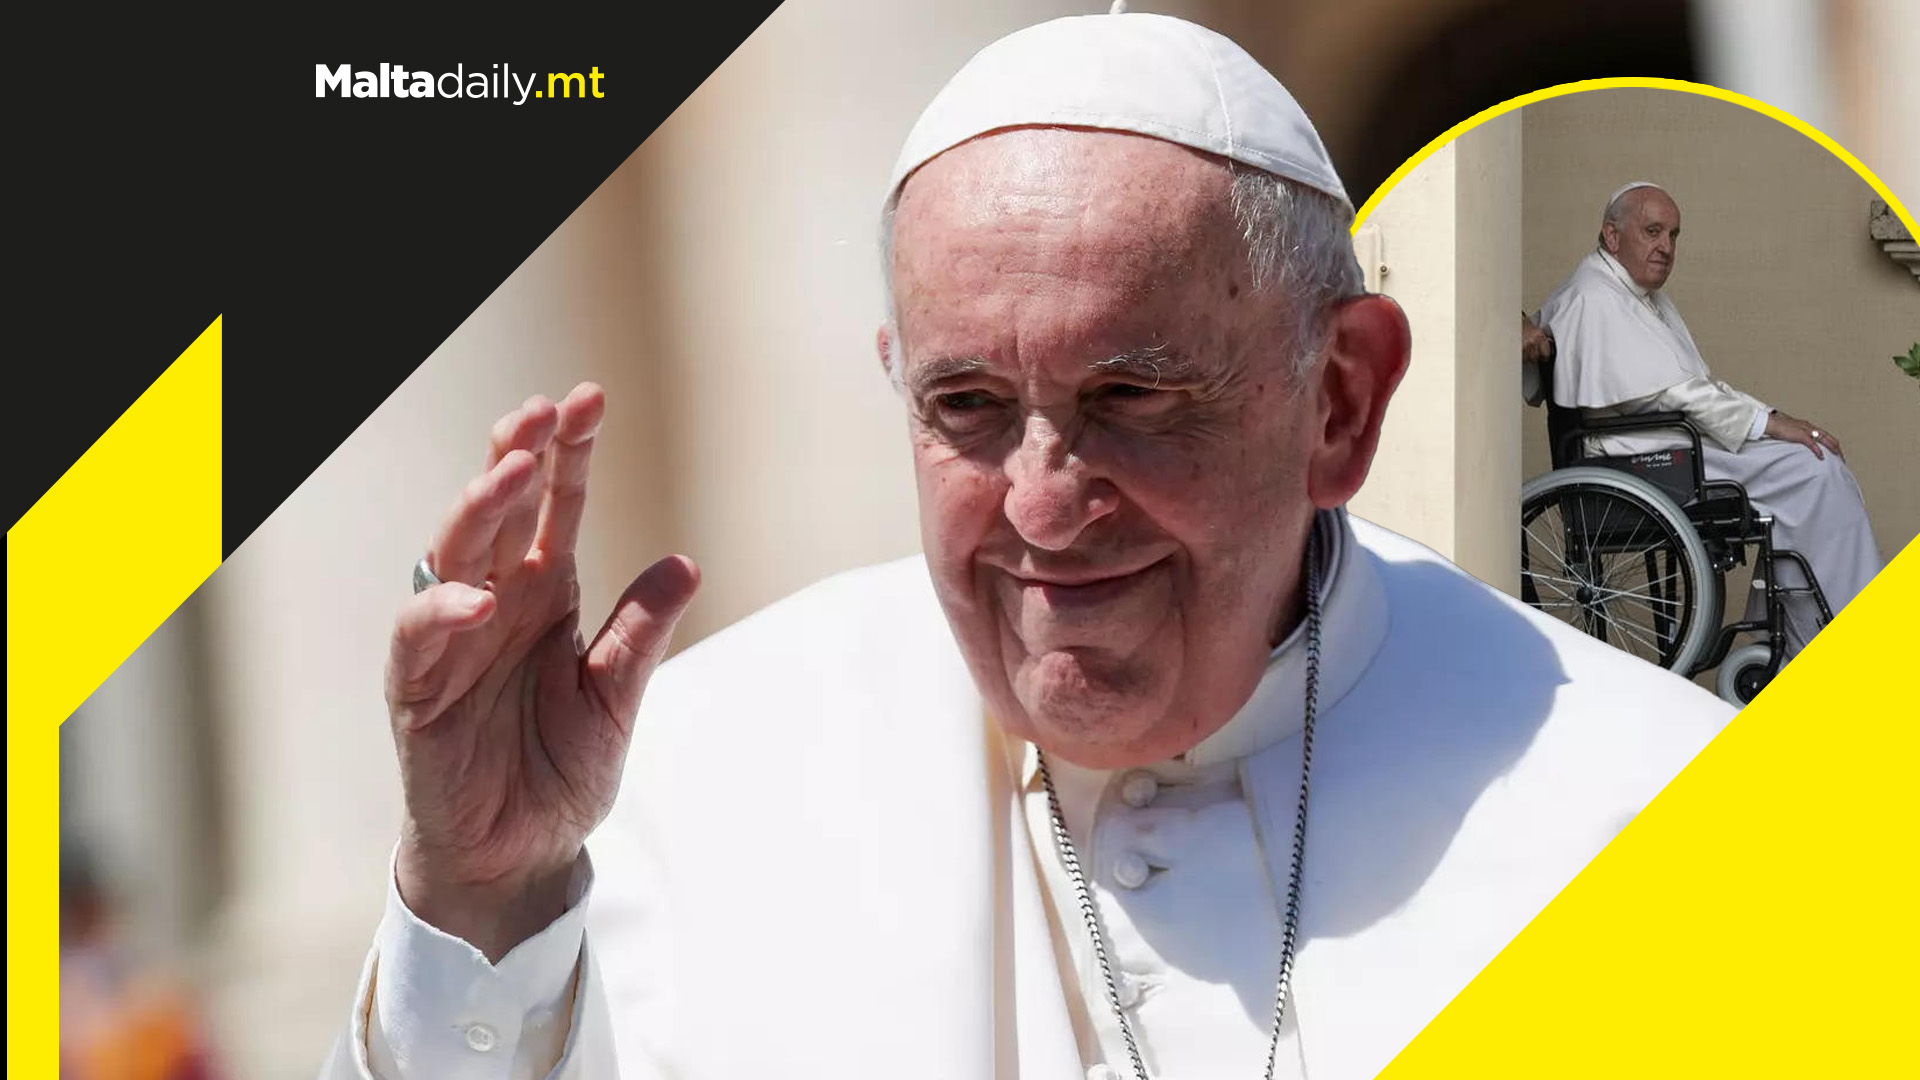 Pope Francis retirement rumoured after 85-year-old announces latest plans